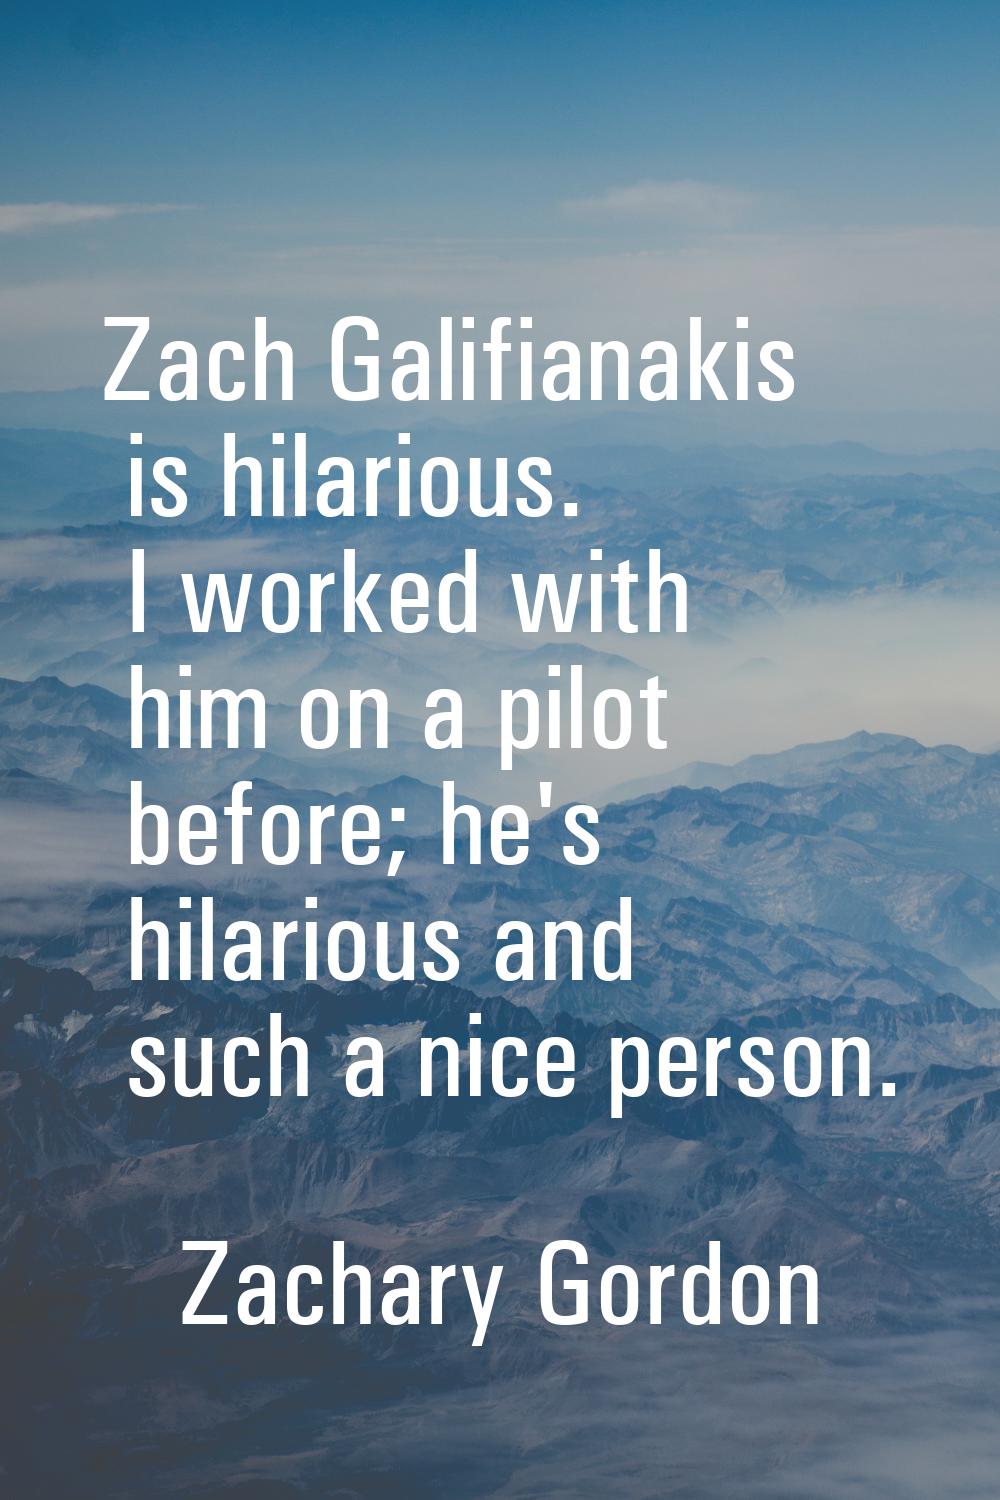 Zach Galifianakis is hilarious. I worked with him on a pilot before; he's hilarious and such a nice